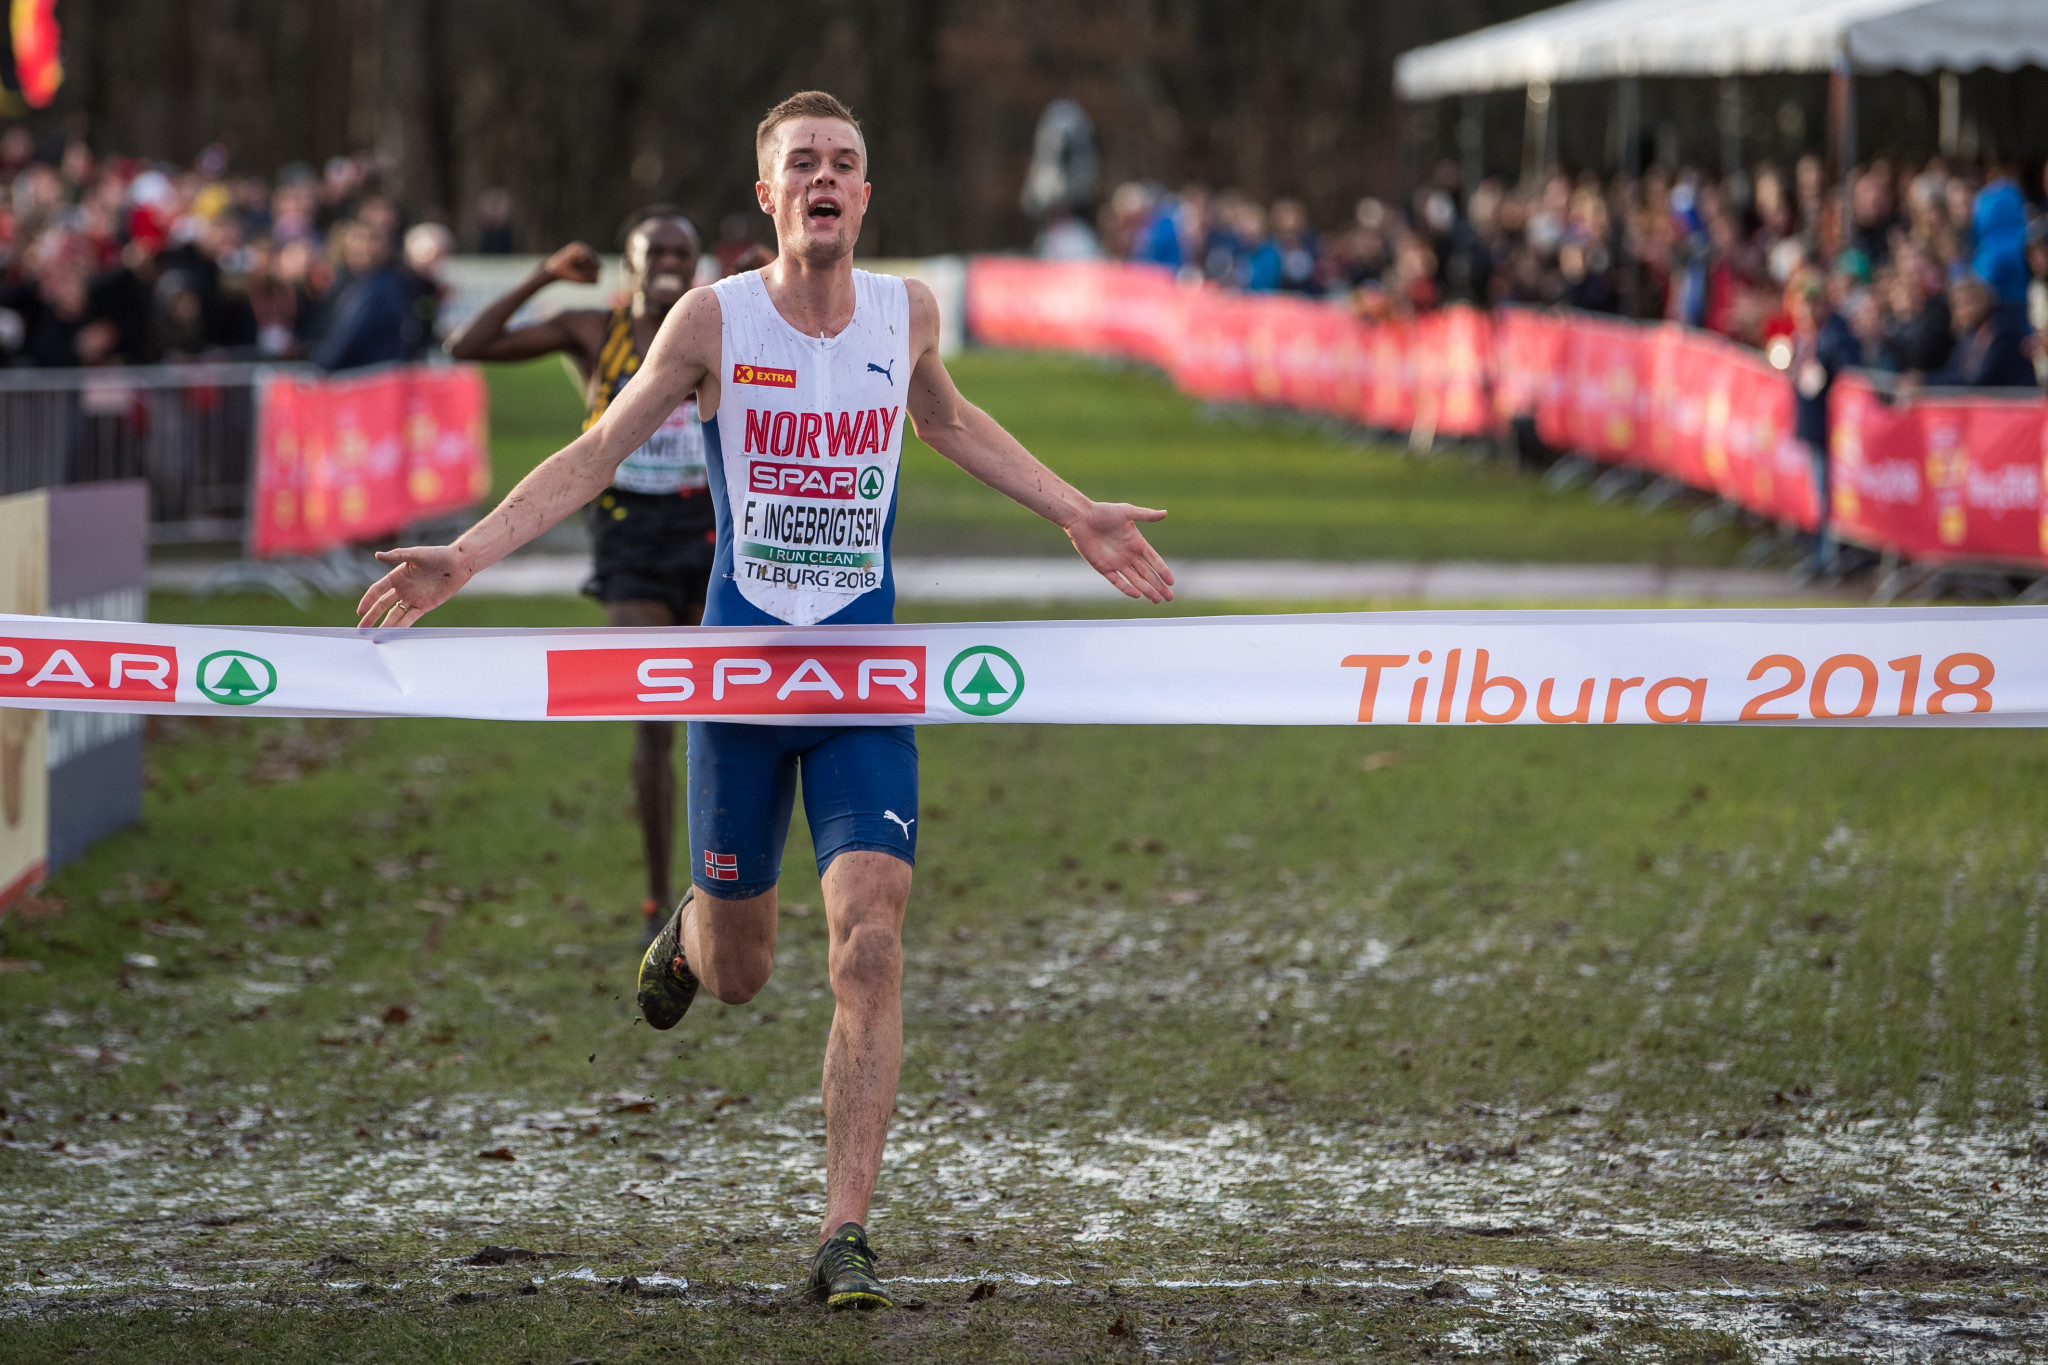 Ingebrigtsen brothers win muddy double at European Cross Country Championships as Can retains women’s title